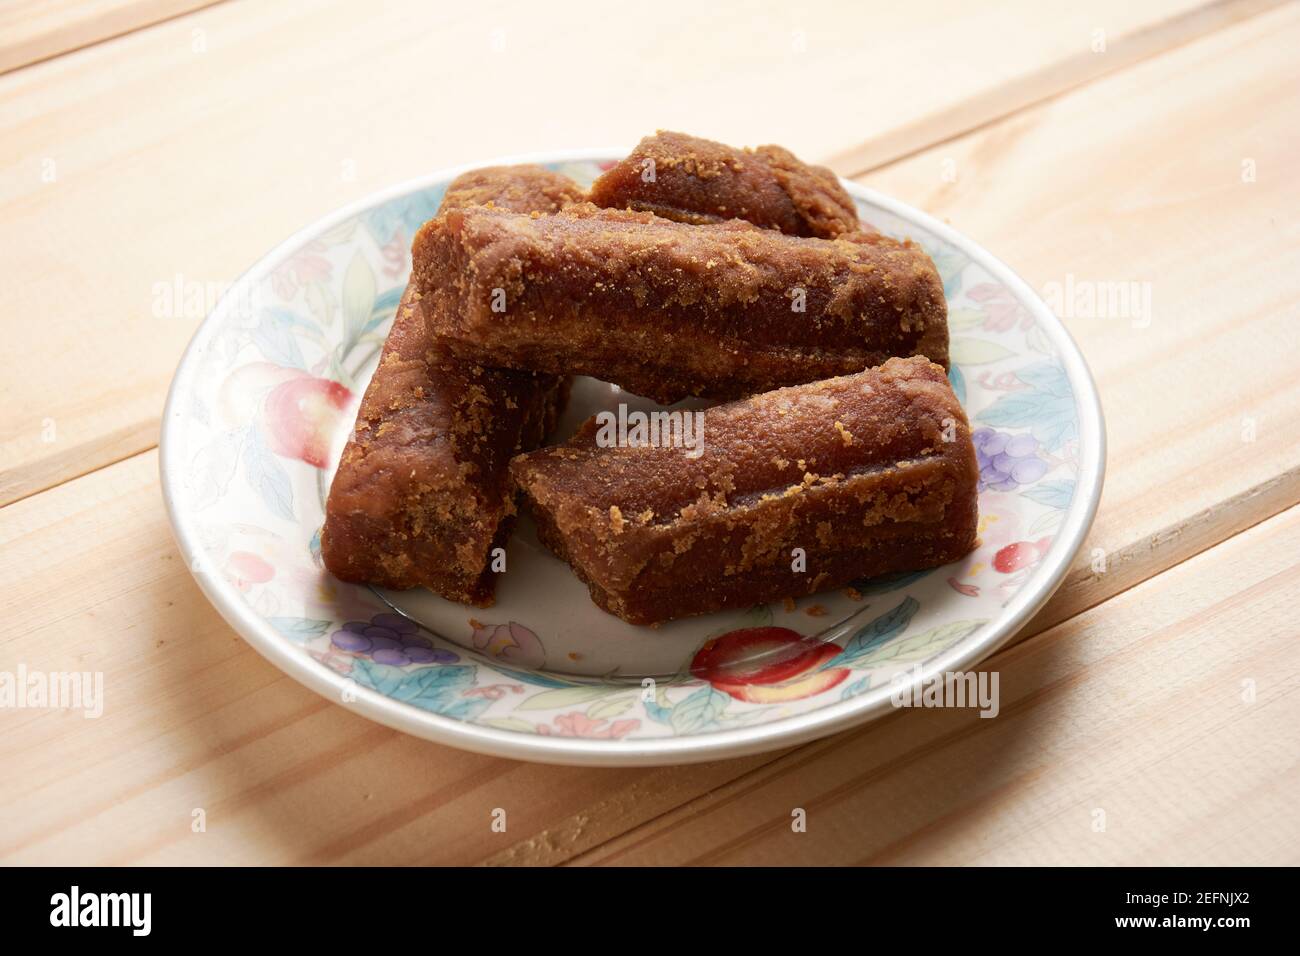 Panela slices in a small plate on wooden table. Also known as rapadura, it is unrefined whole cane sugar typical of Central and Latin America. Stock Photo